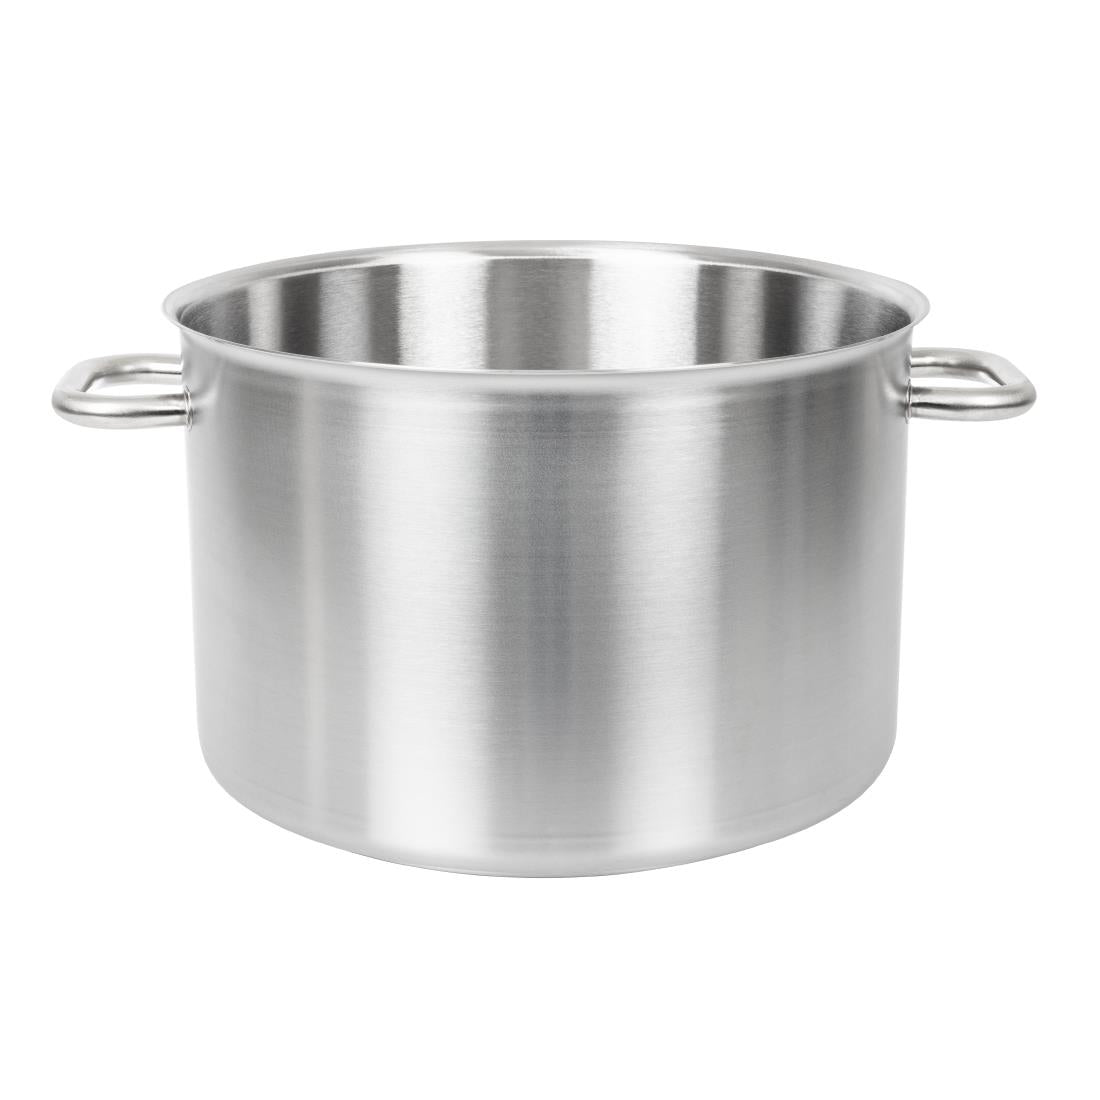 Bourgeat Excellence Boiling Pot 24Ltr JD Catering Equipment Solutions Ltd